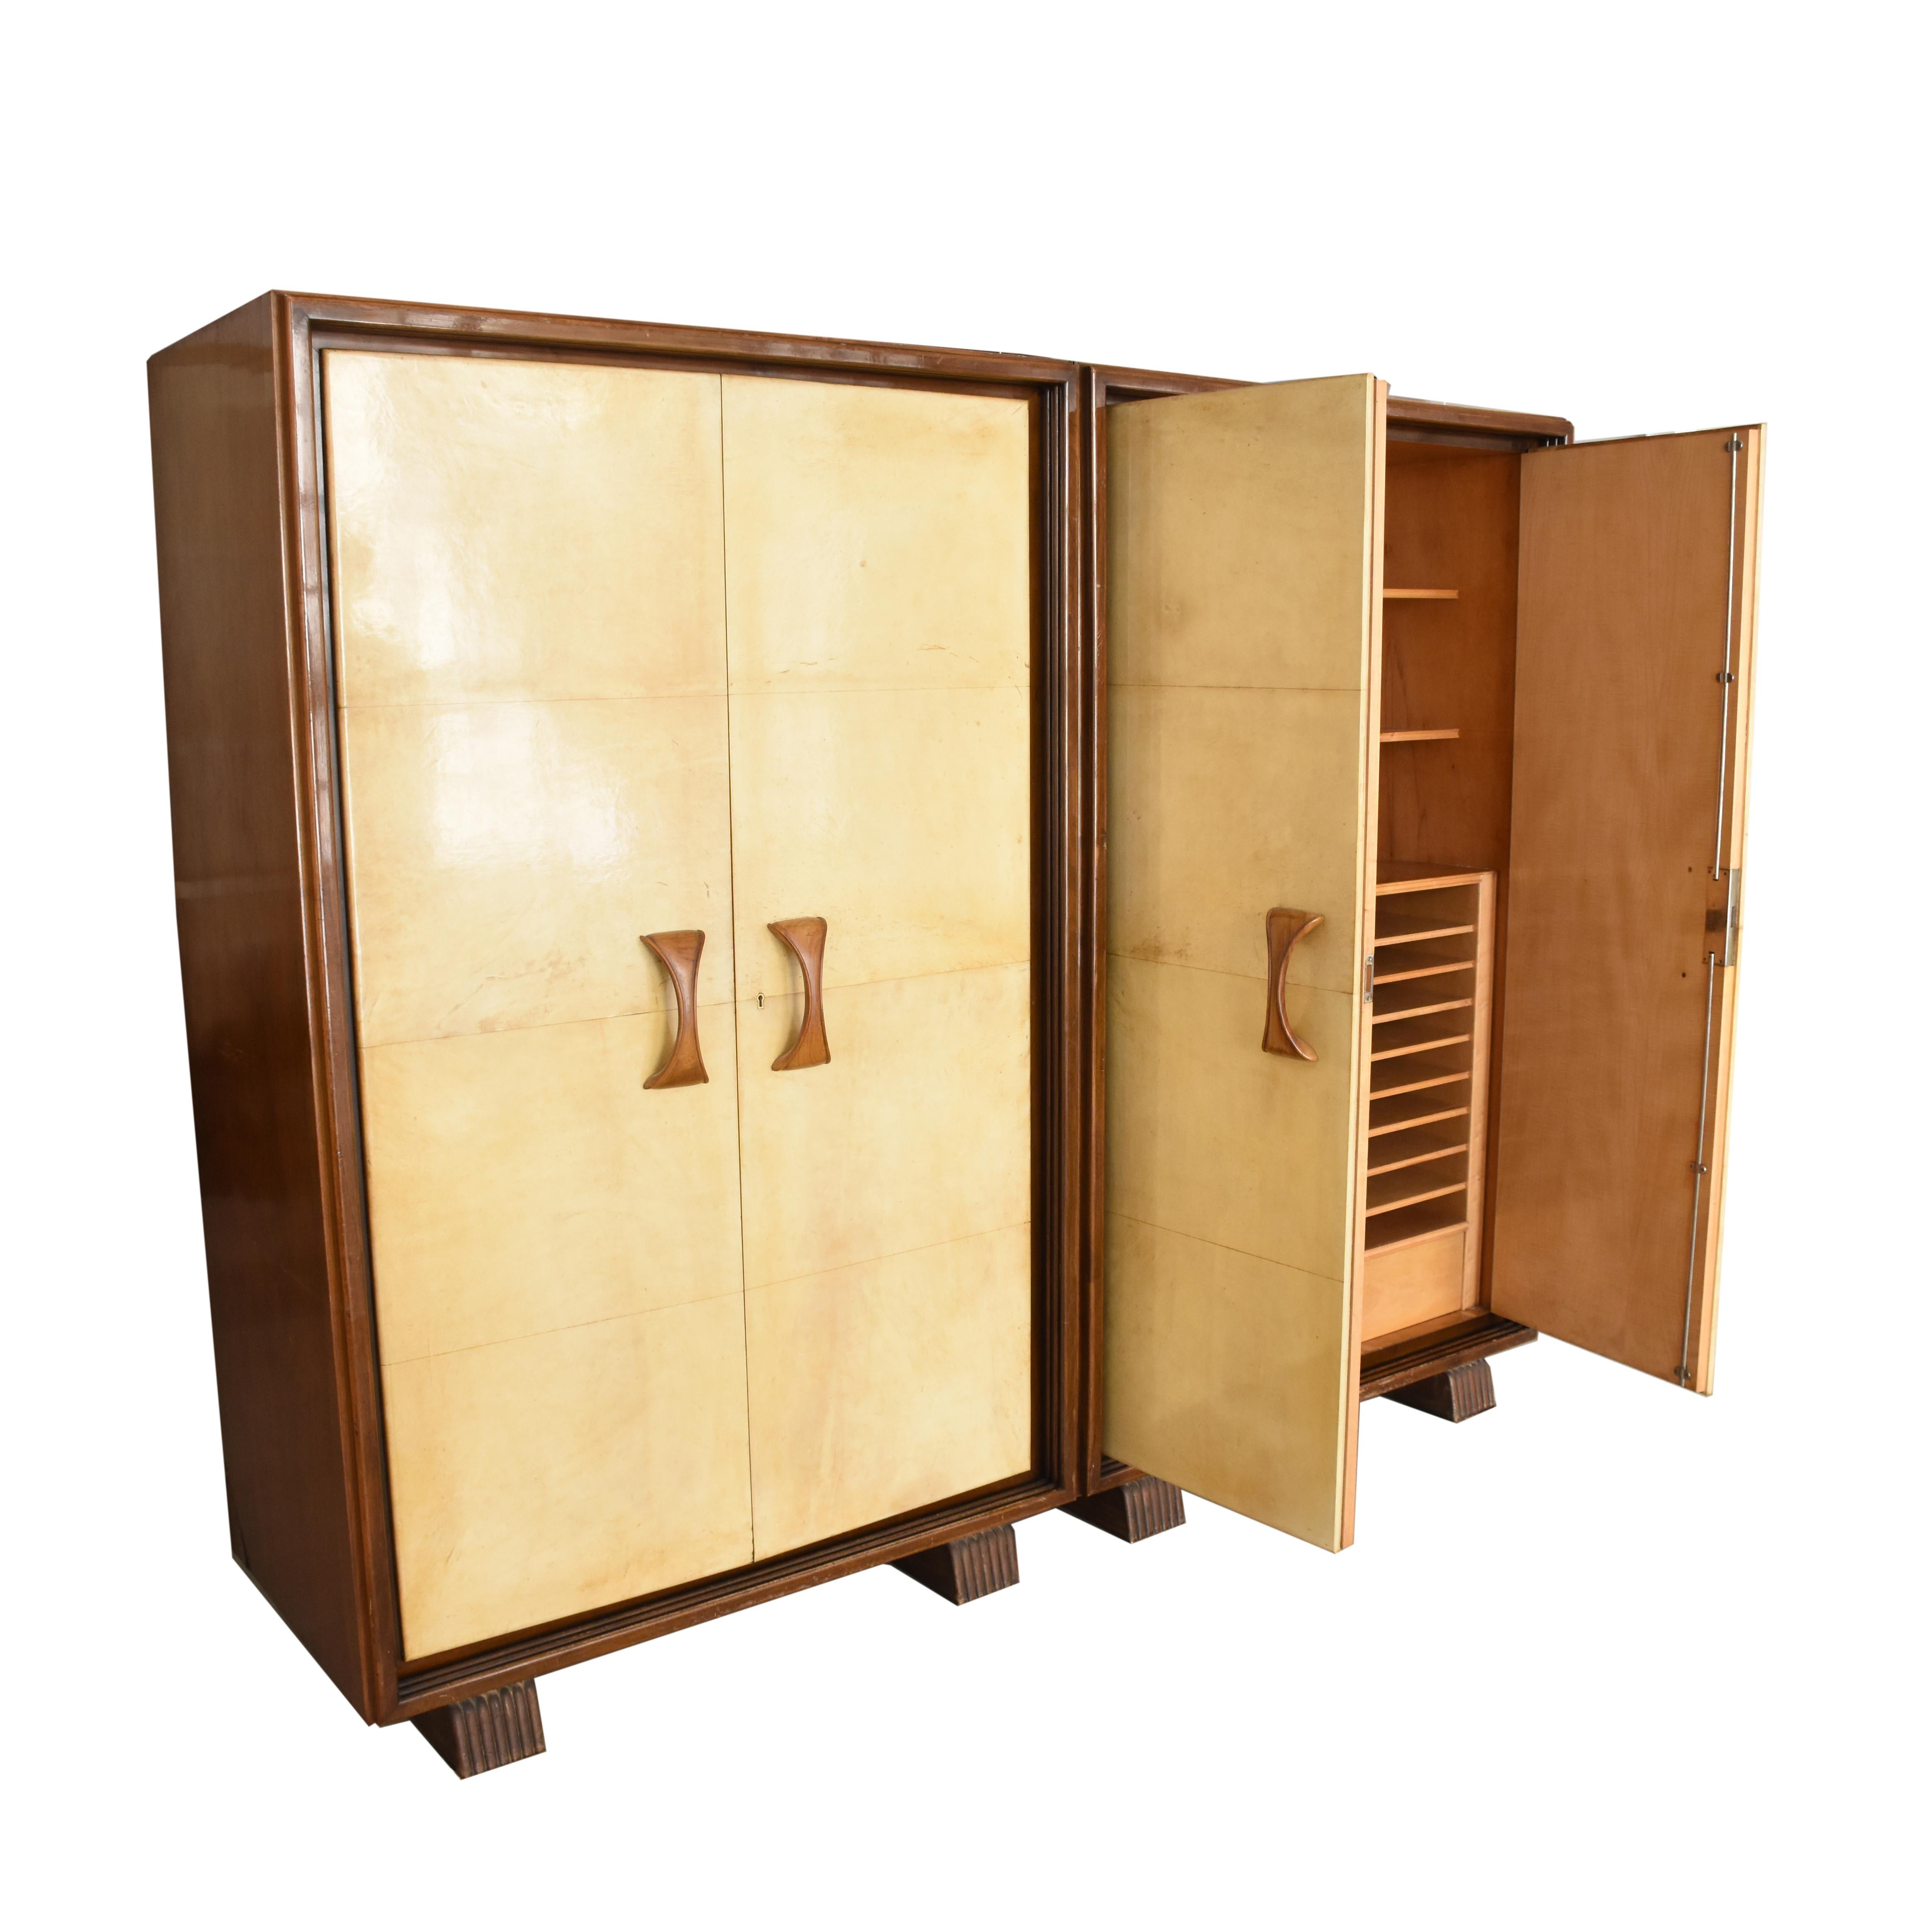 Italian Valzania Signed Wardrobe Covered in Parchment Attributable Ulrich, Italy, 1930s